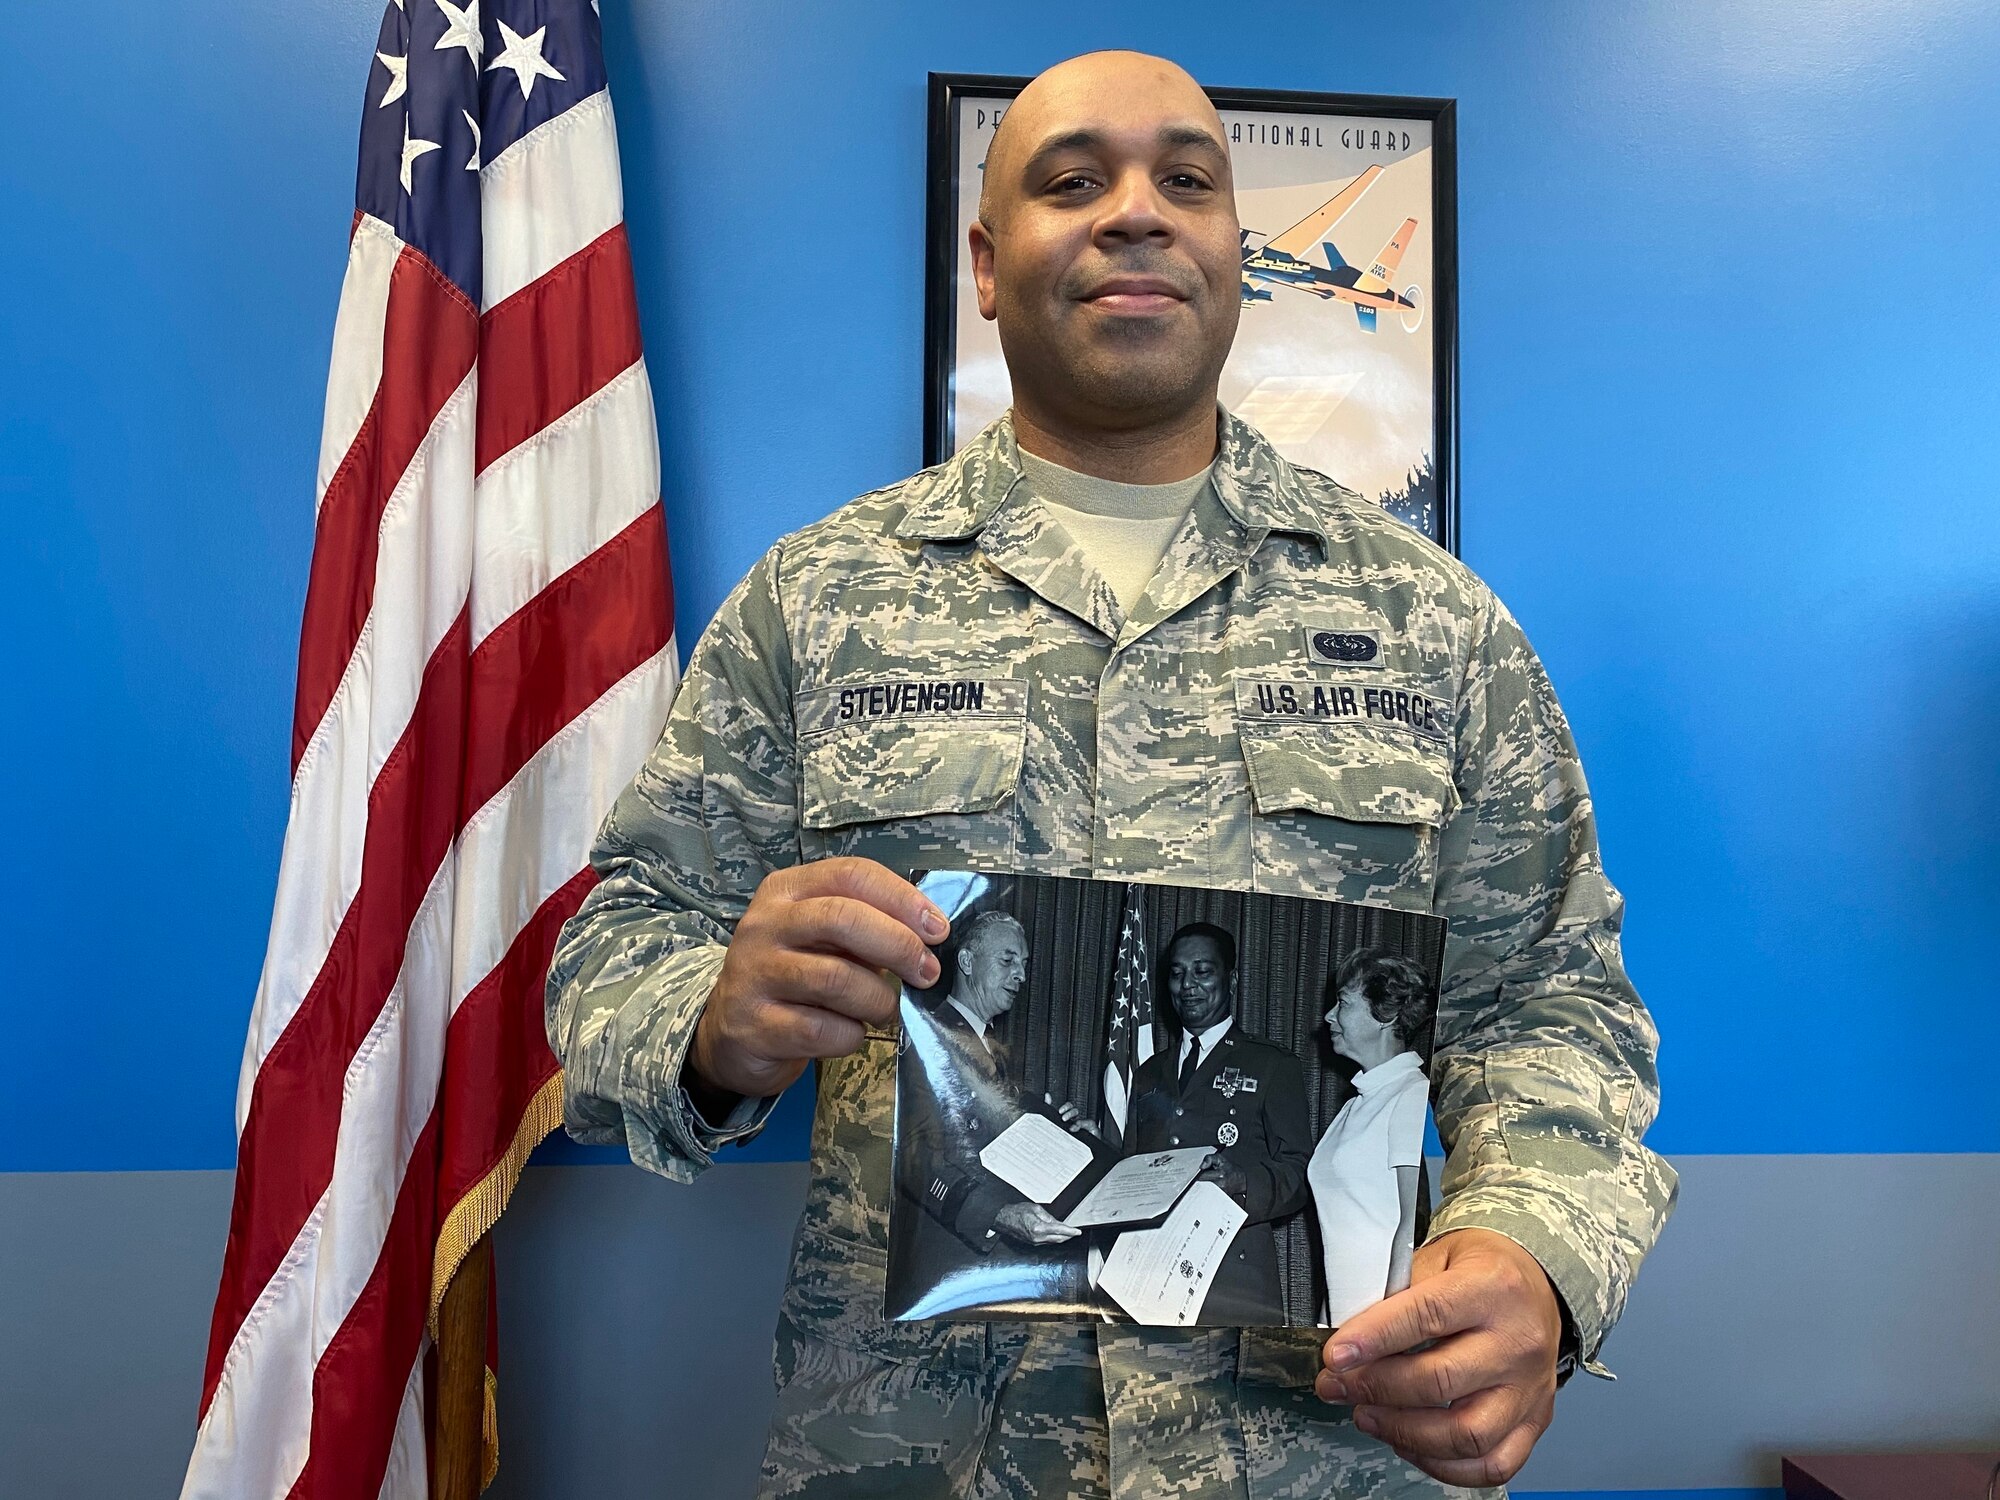 Man standing in air force uniform holding a picture frame.